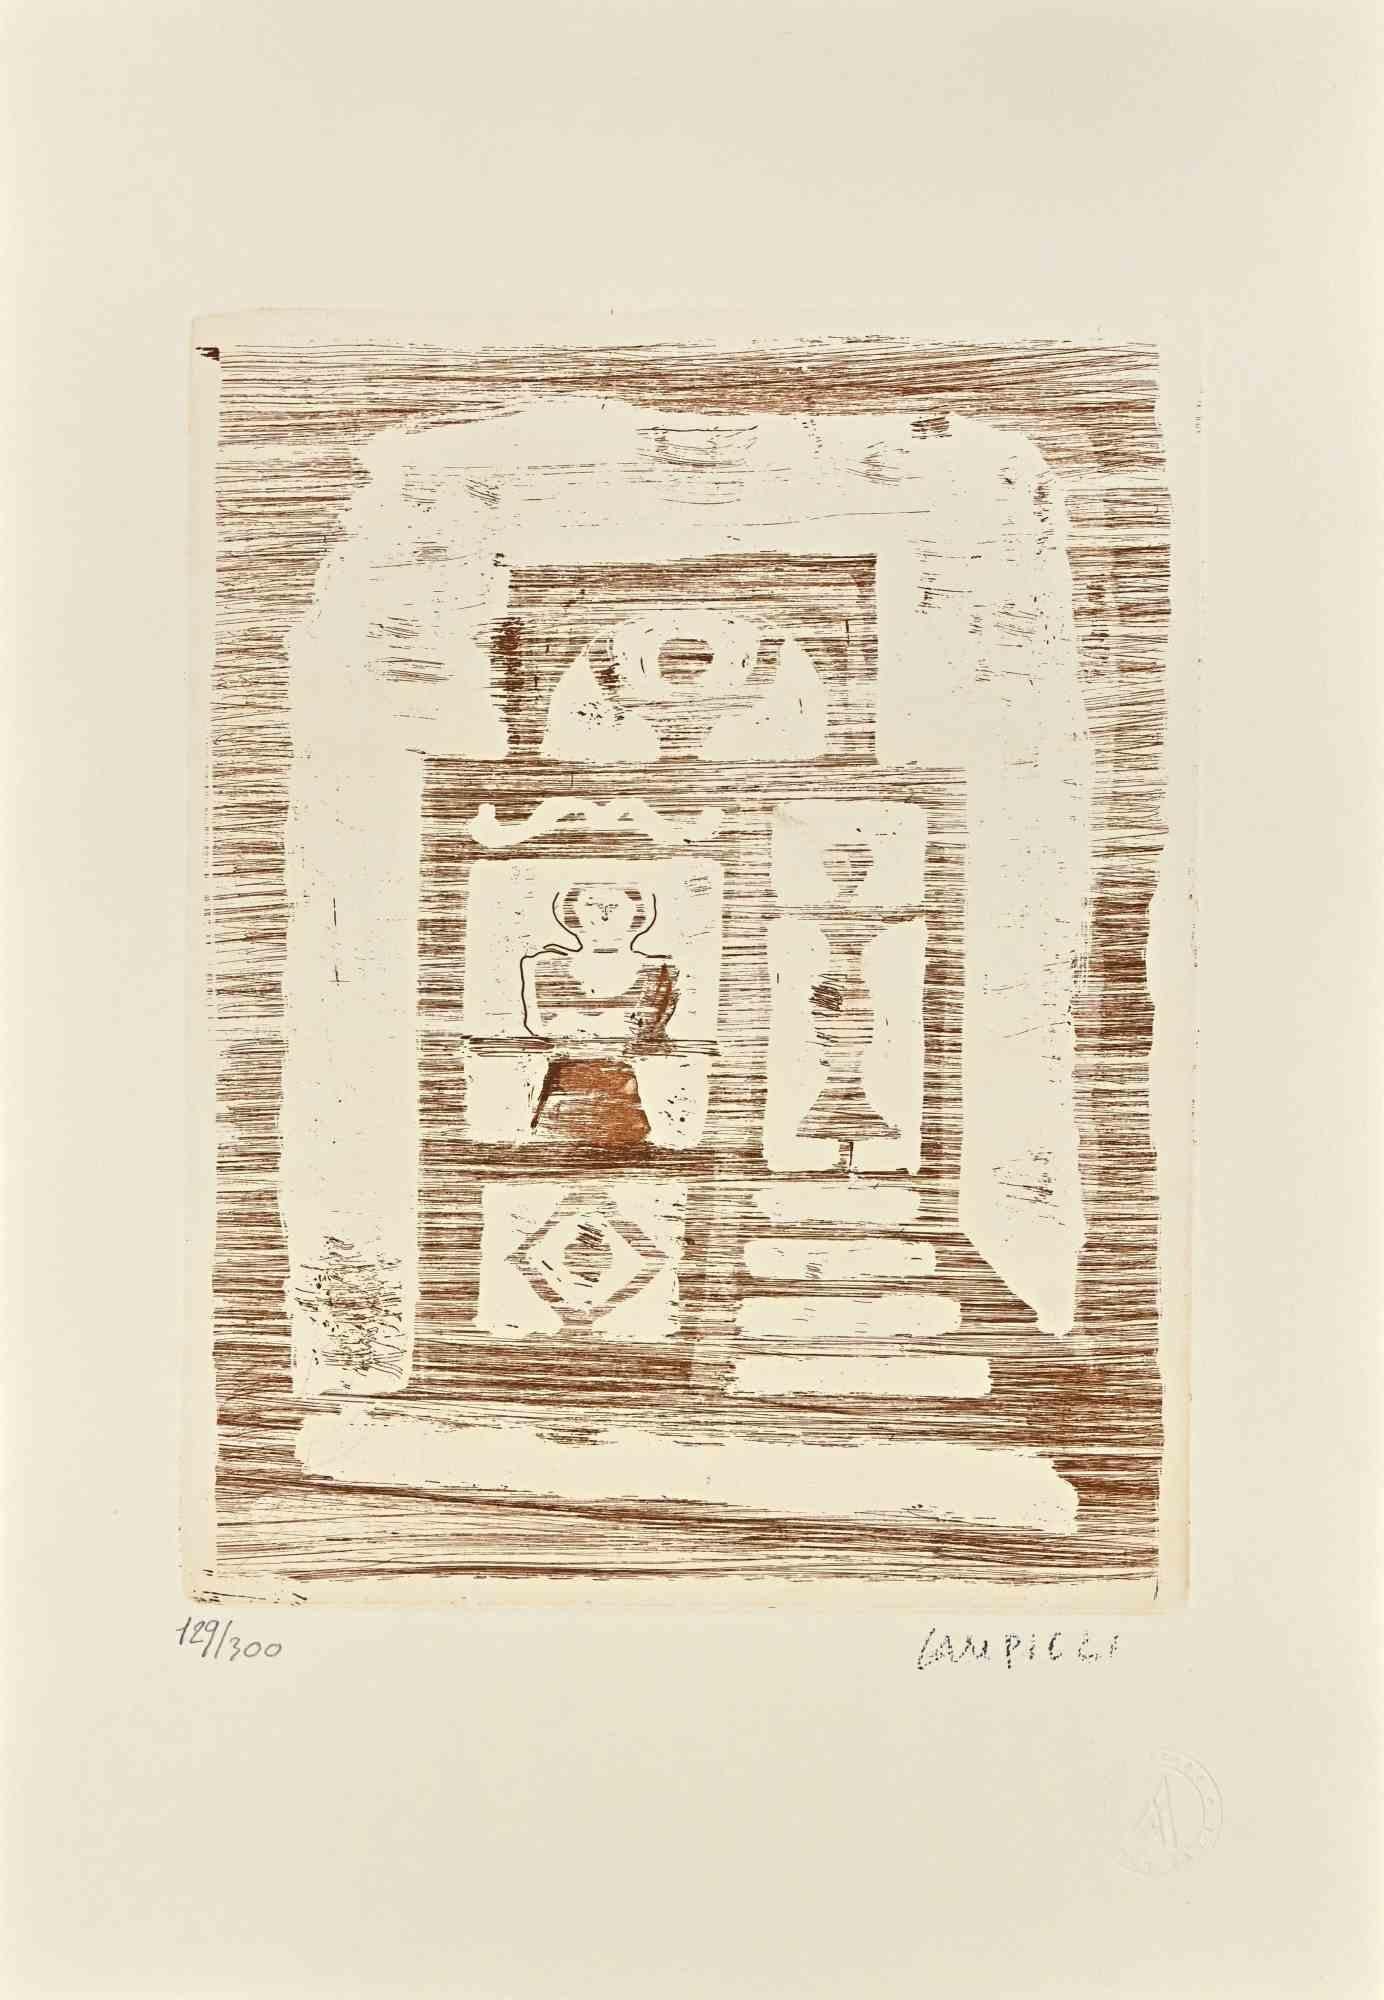 The women's house  is an original print realized by Massimo Campigli in the 1970s.

Etching on paper.

This artwork it is part of a series of works created in the last period of the artist and printed at the turn of the year of his death, which took